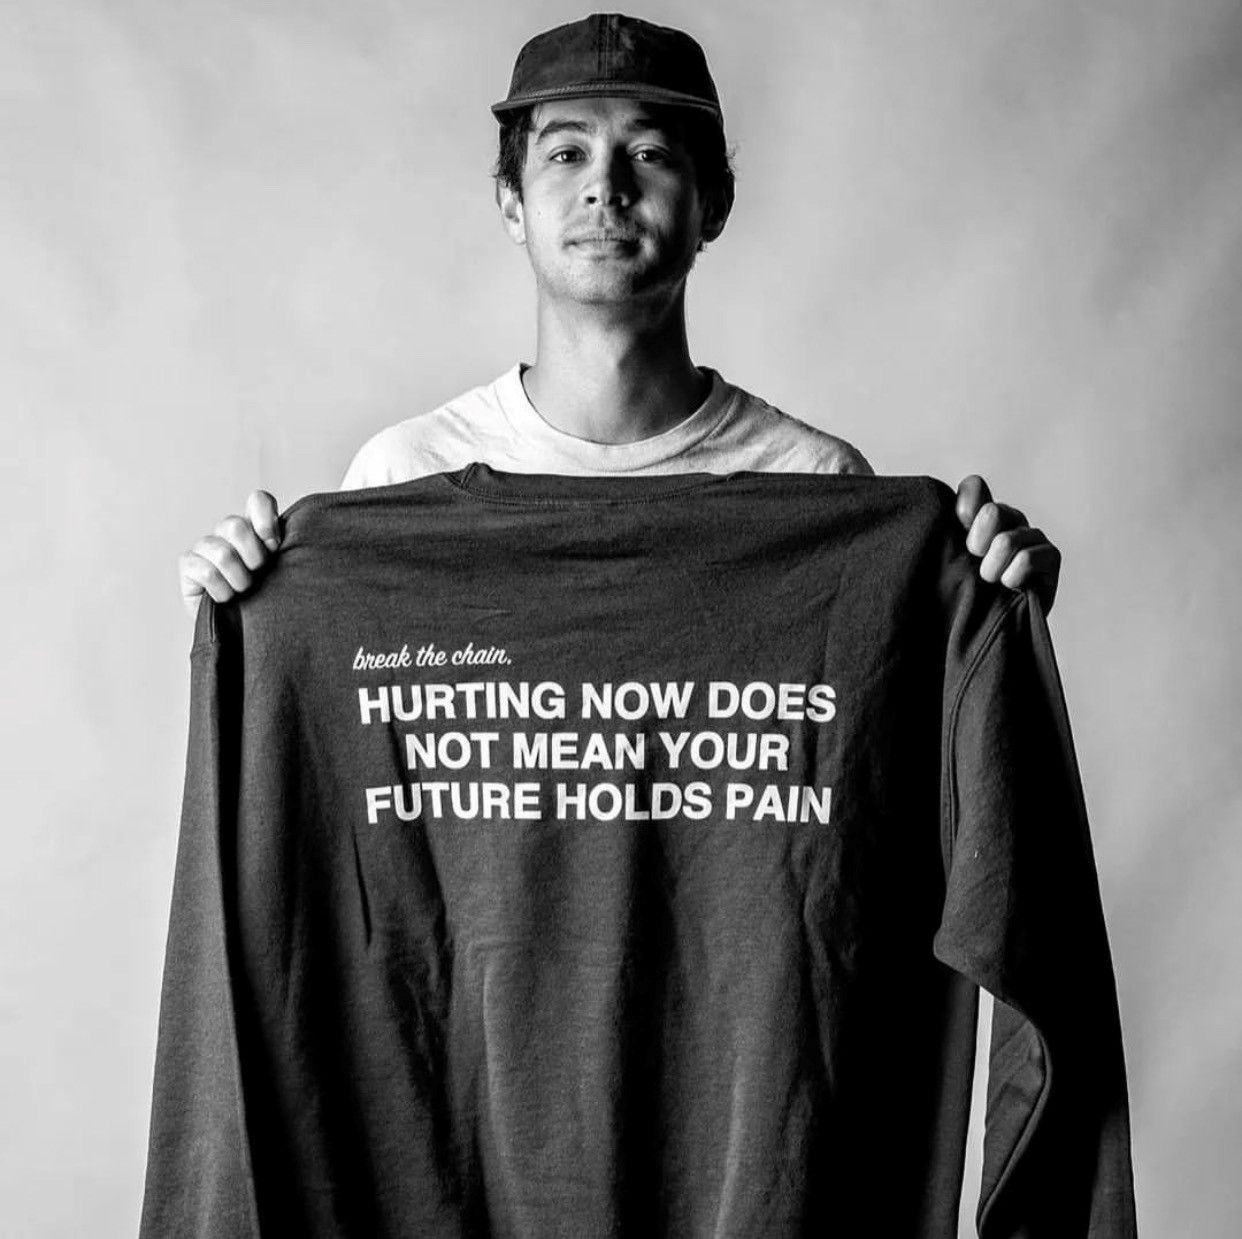 Man looking to camera, holding up a long-sleeve shirt. It says: "Hurting now does not mean your future holds pain."